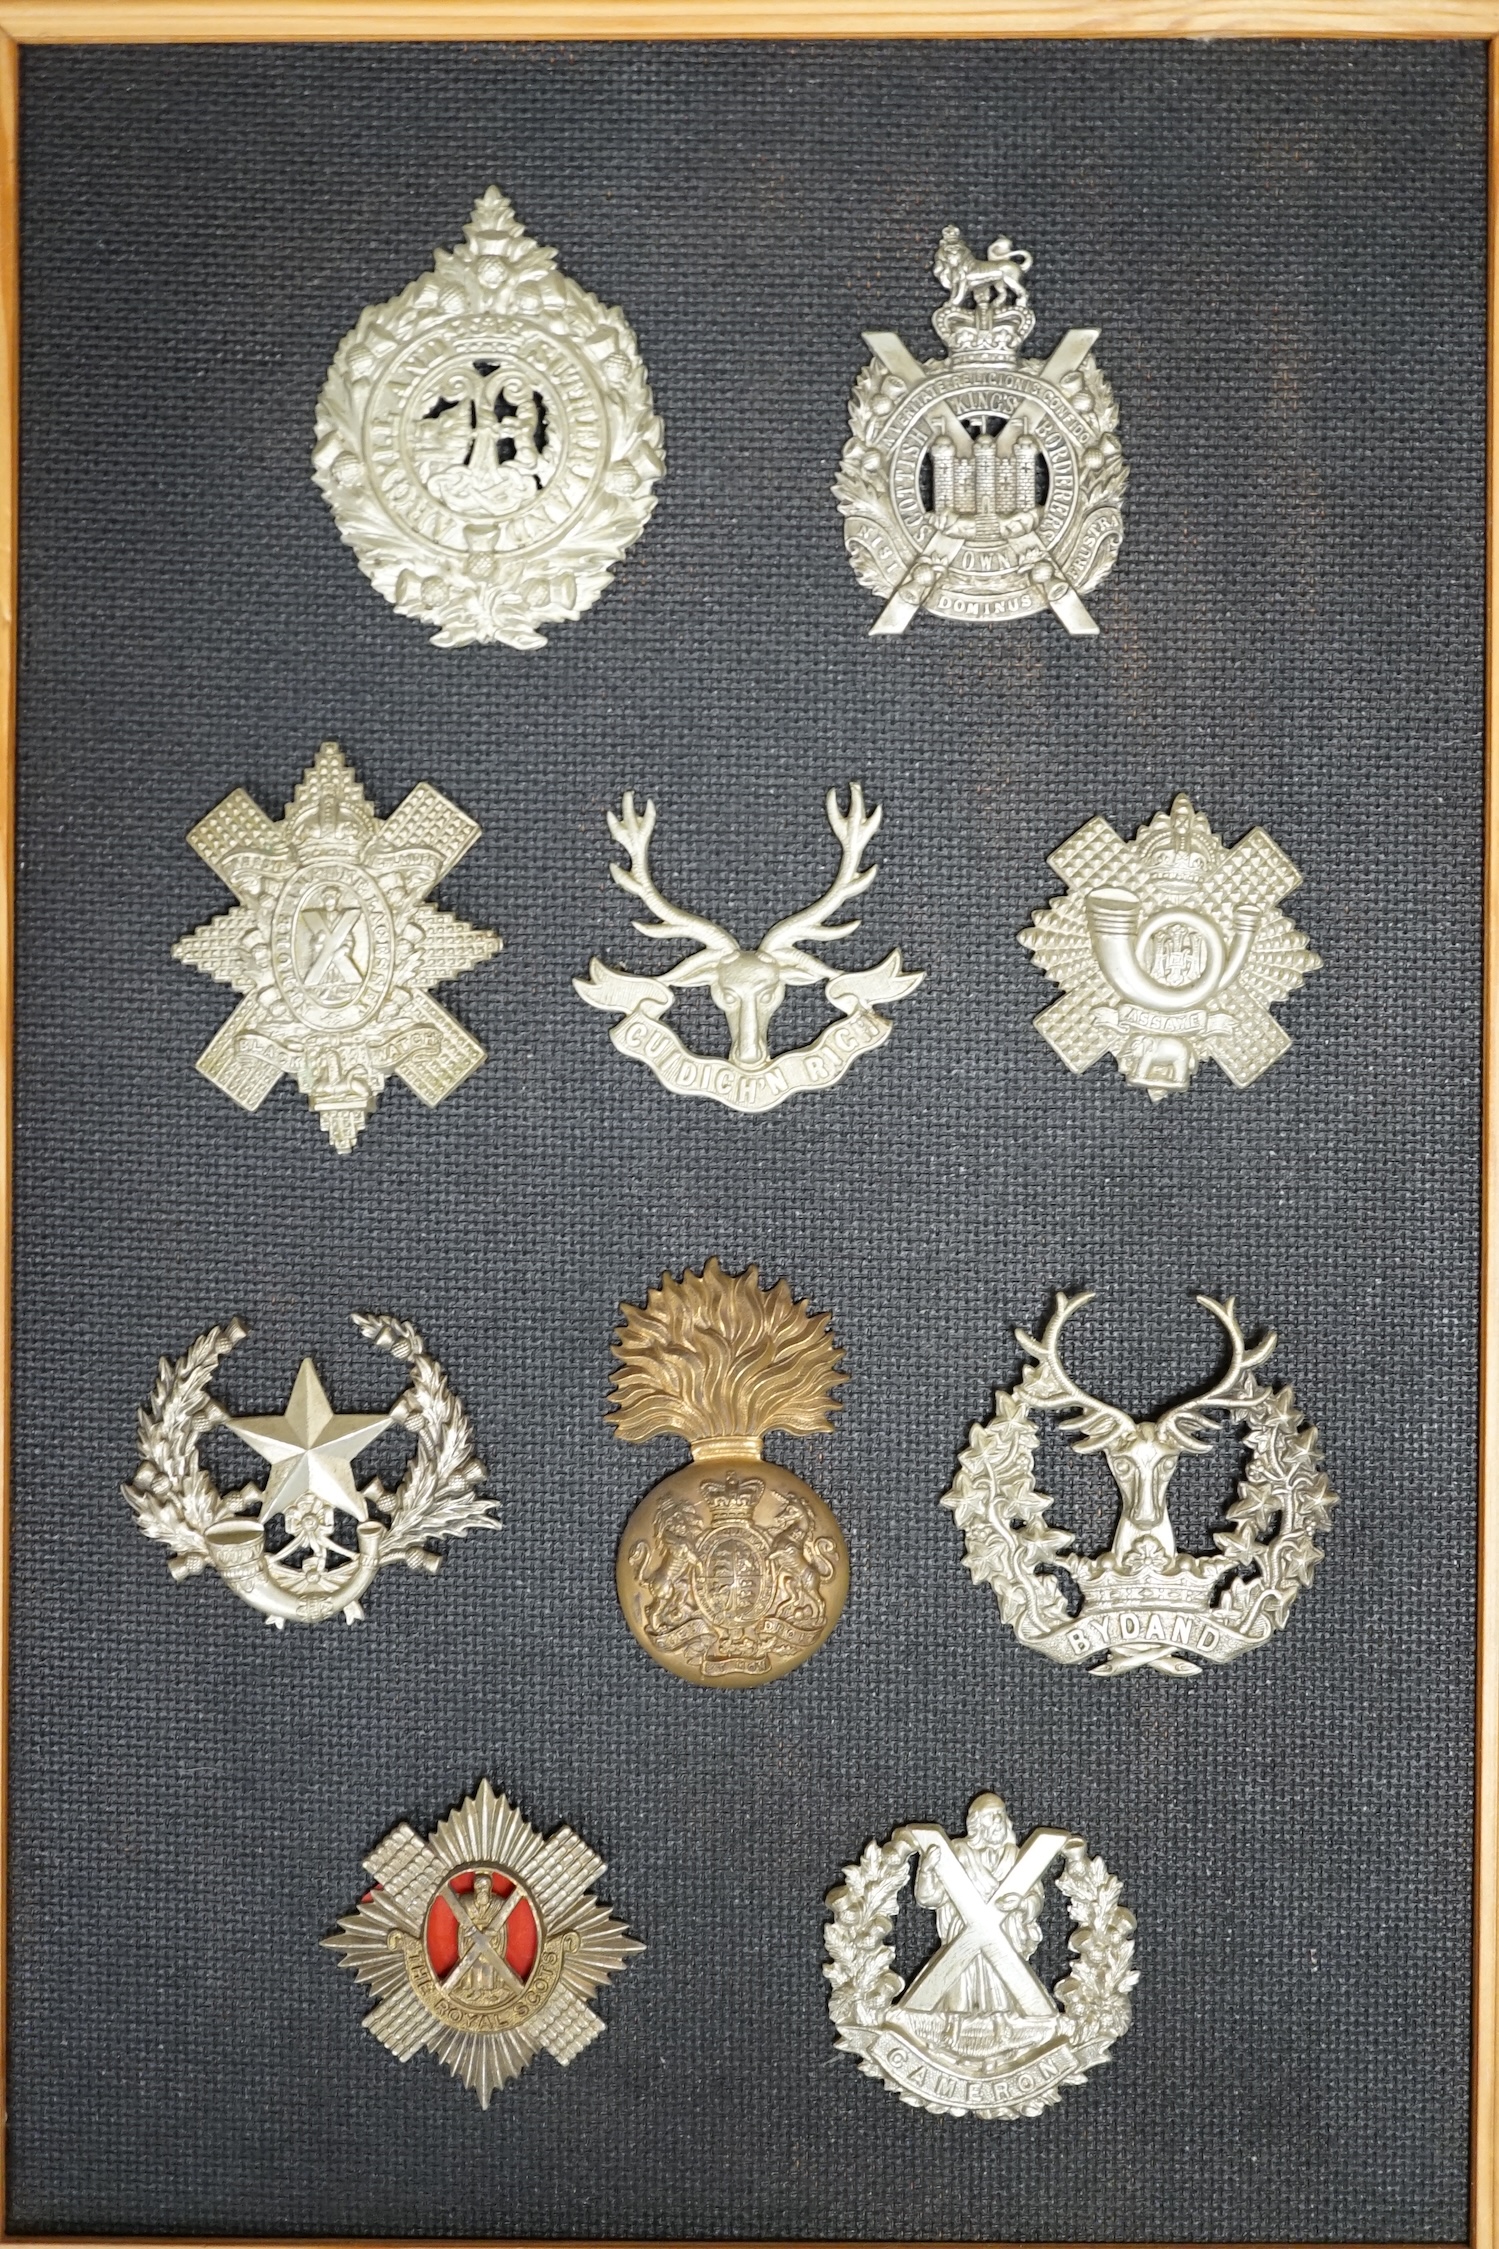 Ten military cap and Glengarry badges mounted on a board including; The King’s Own Scottish Borderers, the Argyle and Sutherland Regiment, the Royal Scots, the Gordon Highlanders, The Queen’s Own Cameron Highlanders, etc